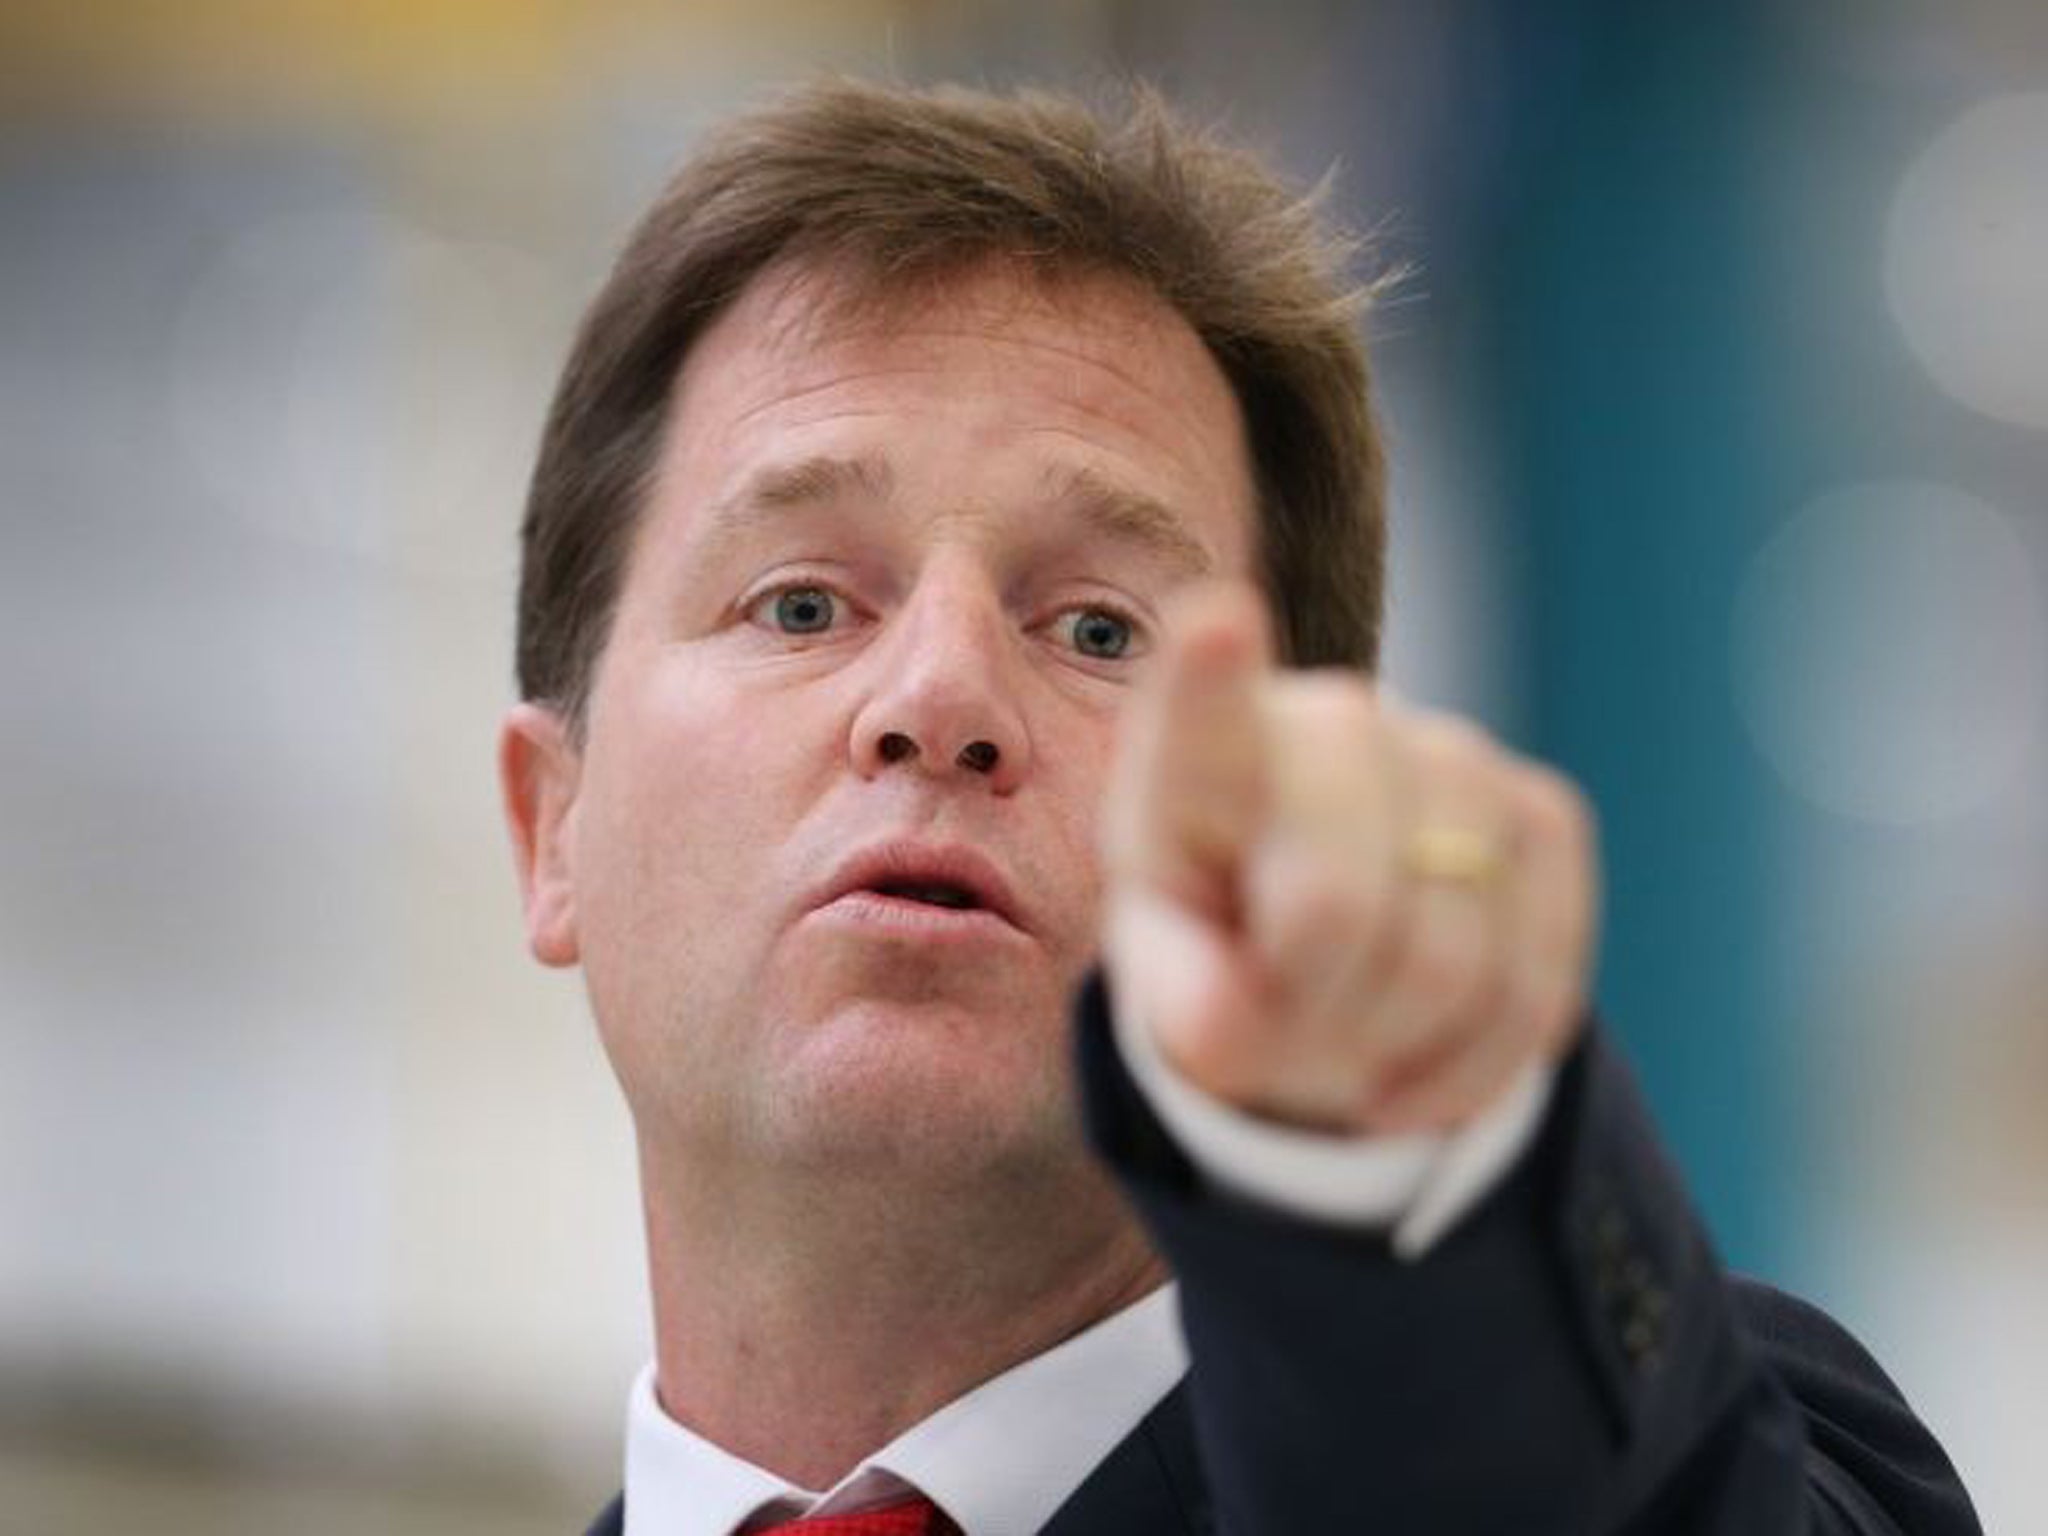 People need to decide which side they are on over links with Brussels ahead of next year's European elections, says Nick Clegg